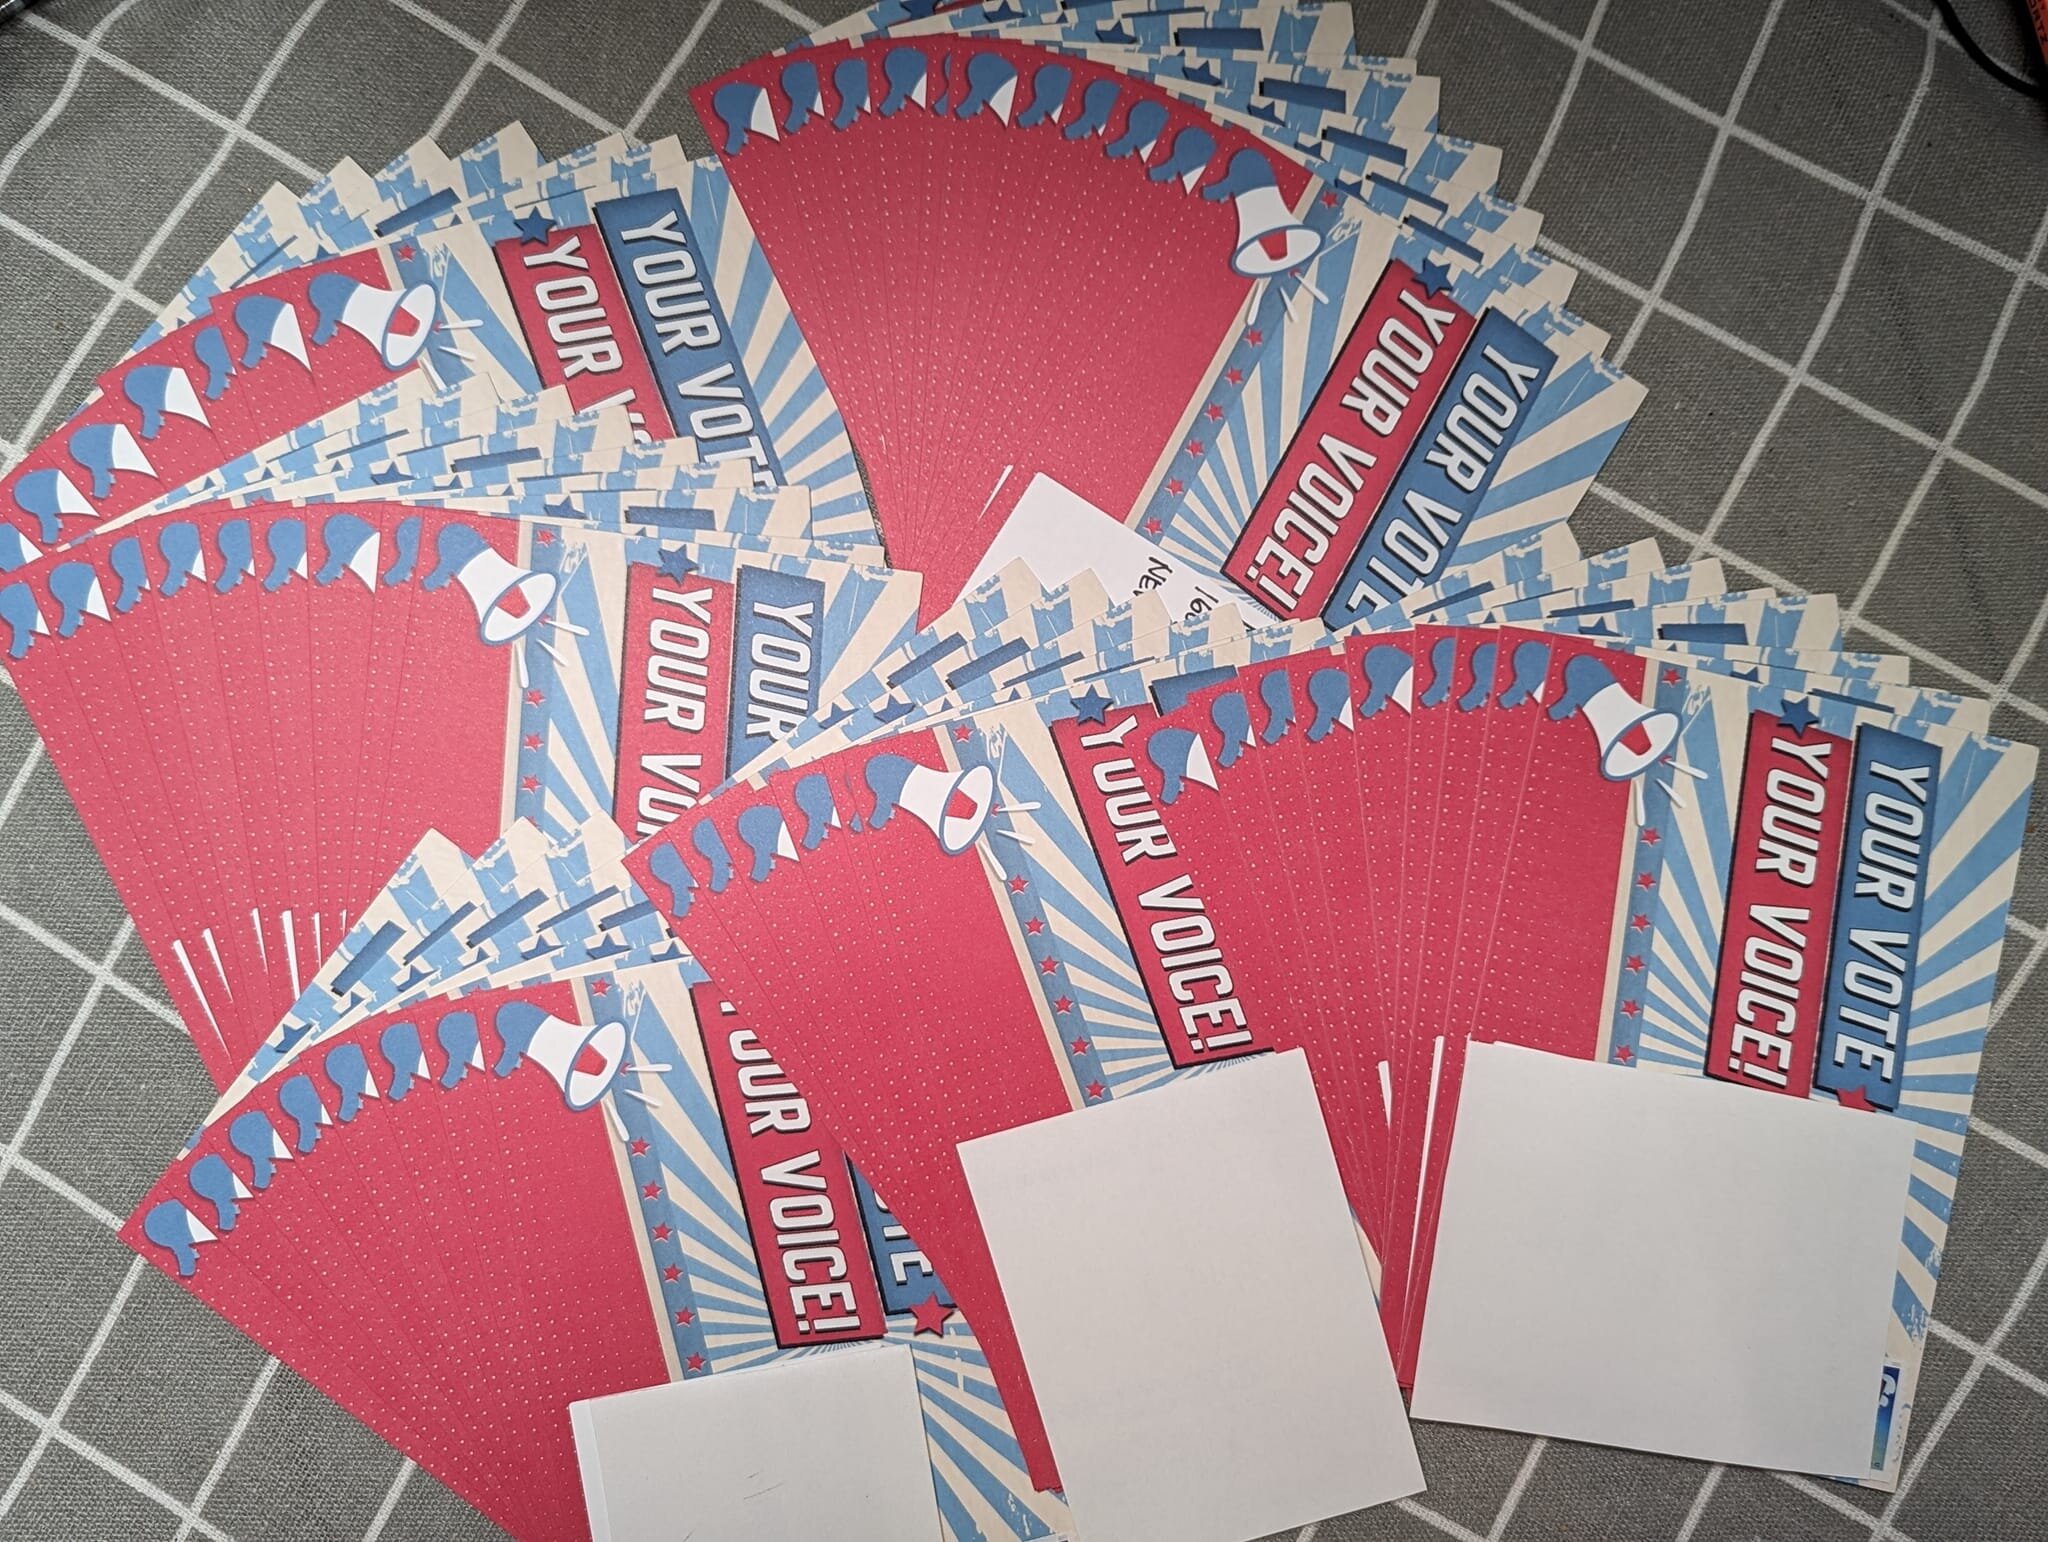 50 postcards to support Tom Suozzi in NY 3rd.  Early voting starts Saturday, special election day Feb. 13.  Still time to text and phone bank!  Let's flip George Santos's seat! Activate America activateamerica.vote/postcards